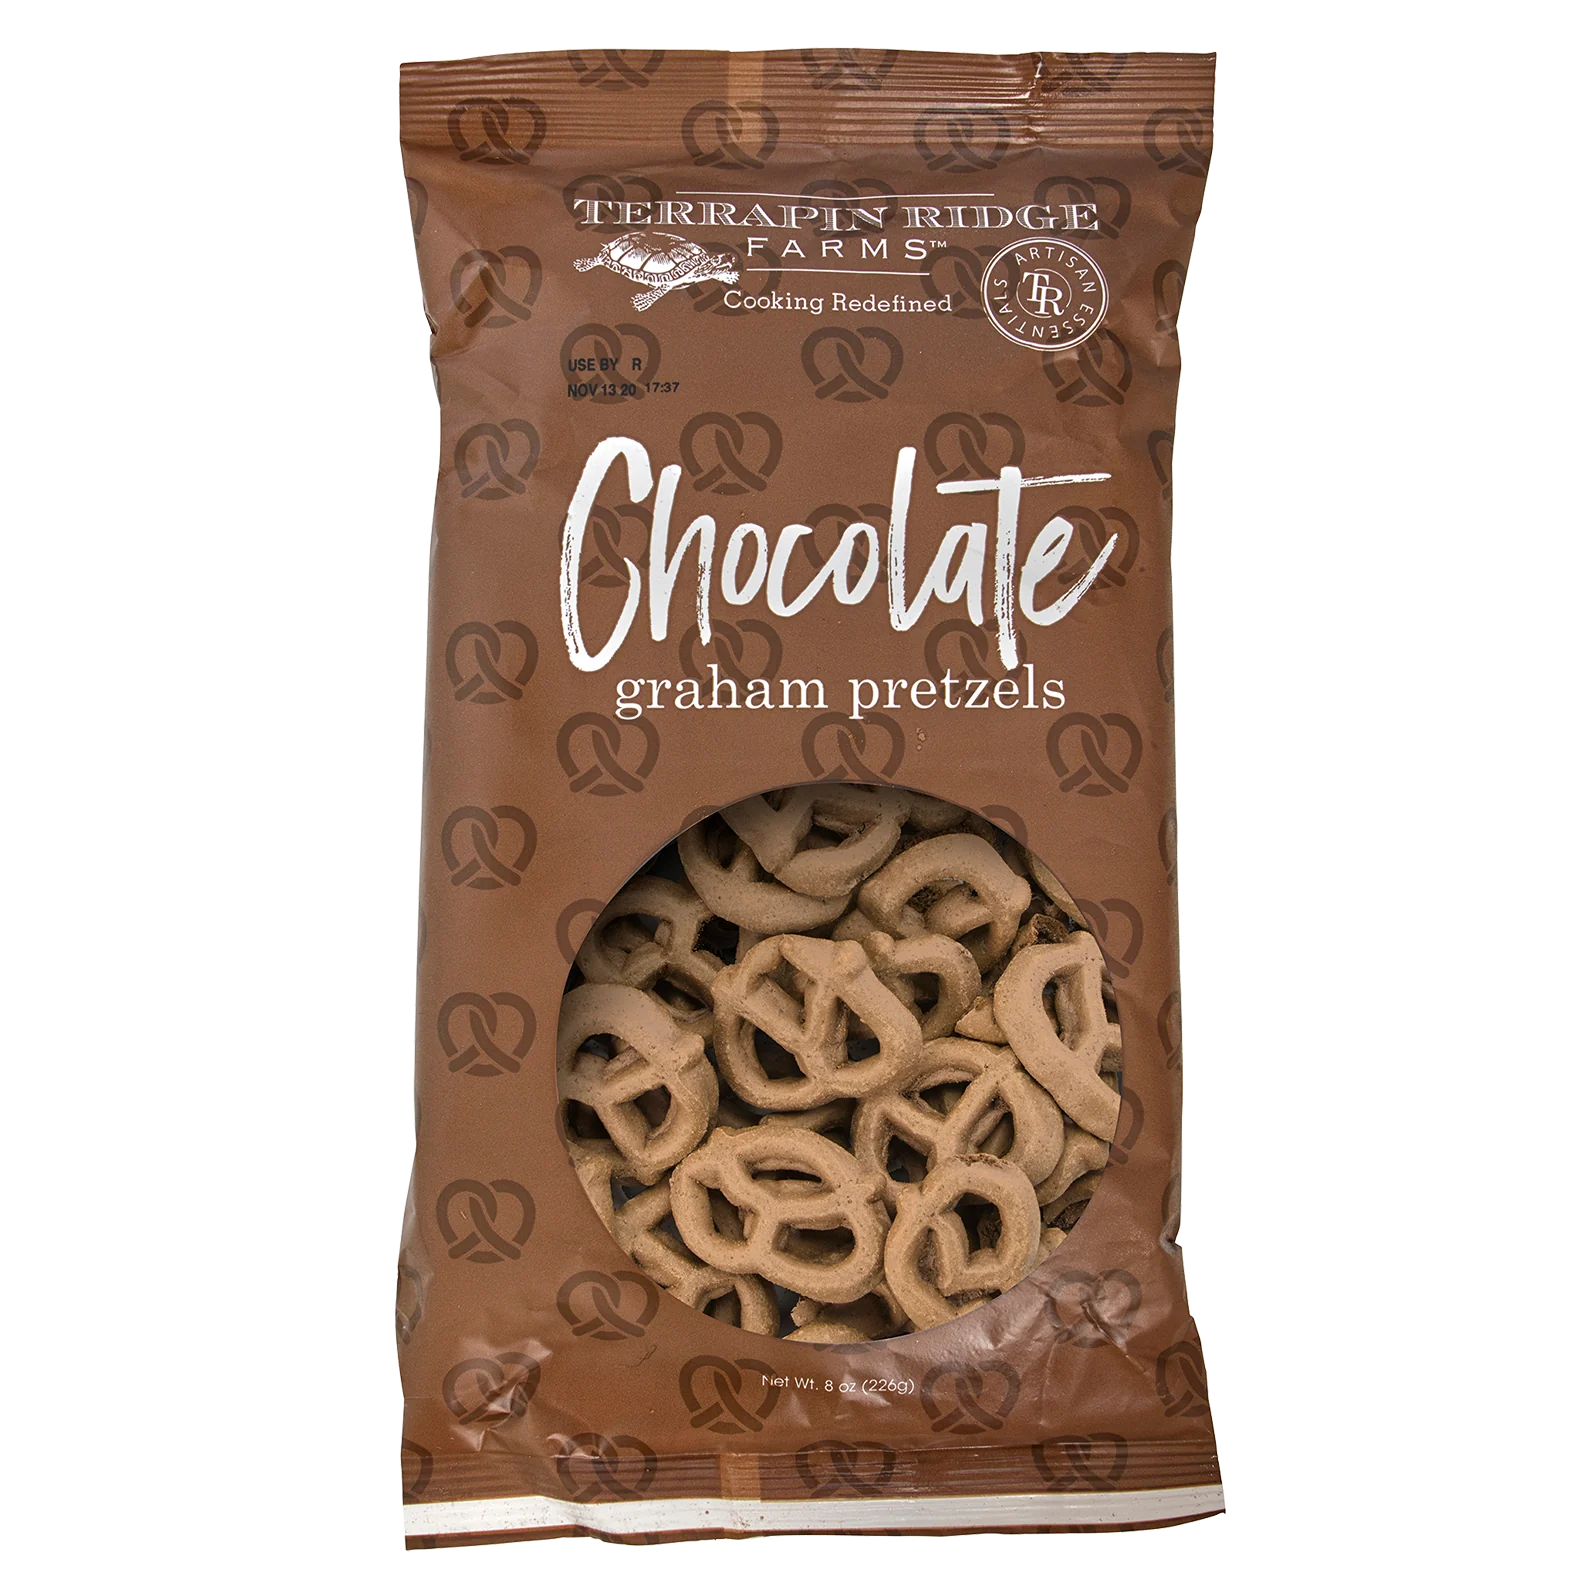 A bag of Terrapin Ridge Chocolate Pretzels, perfect for snacking.